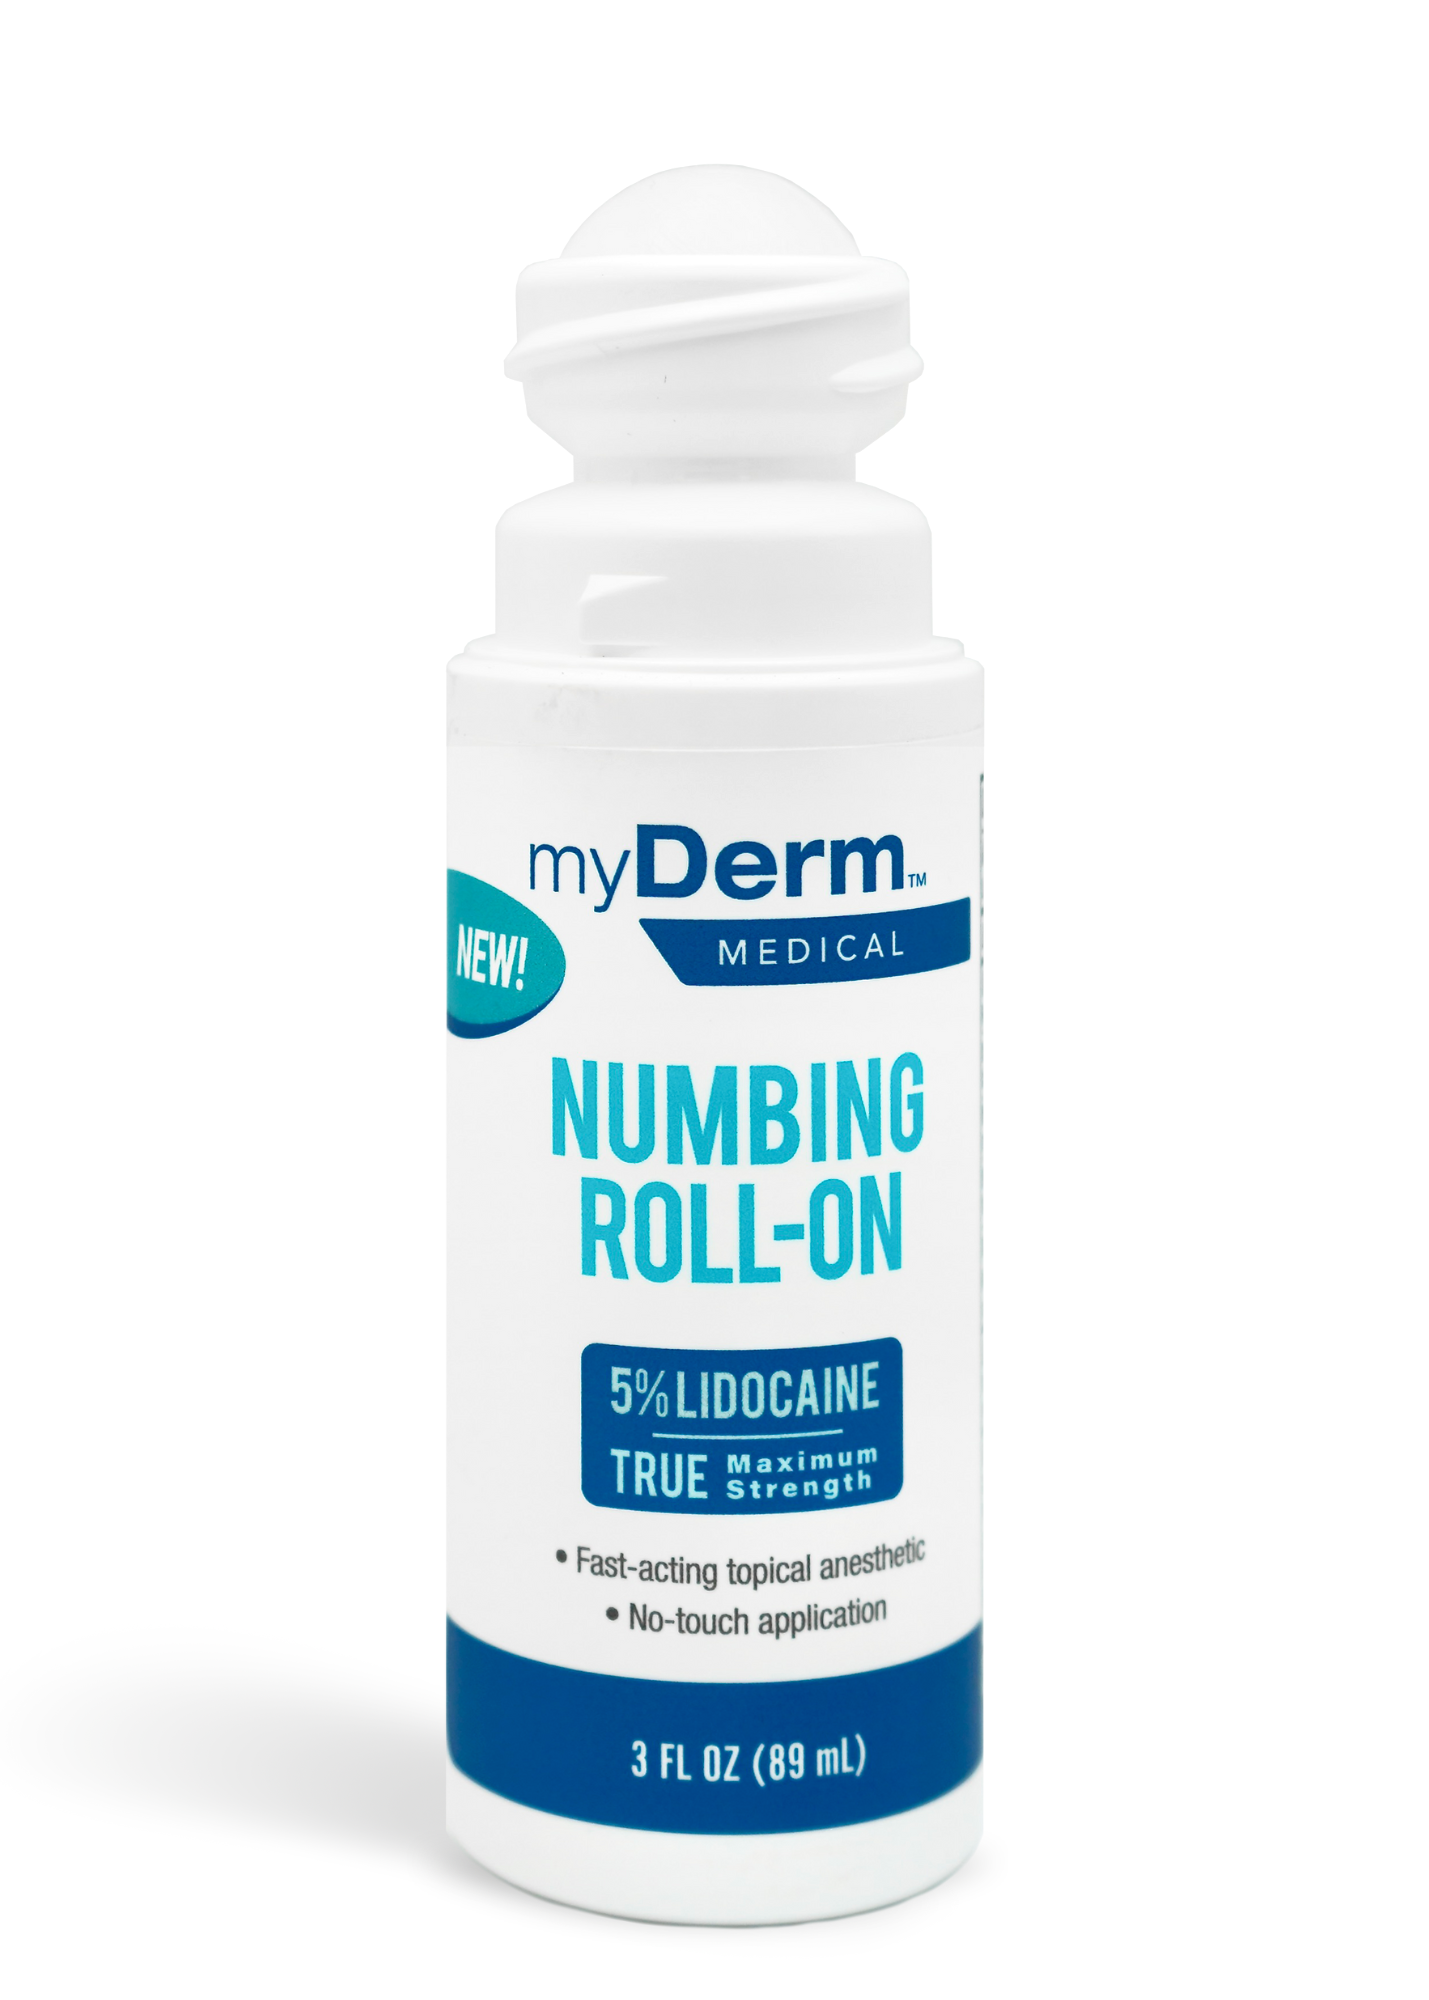 Clinical-Strength Lidocaine Numbing Roll-On Cream